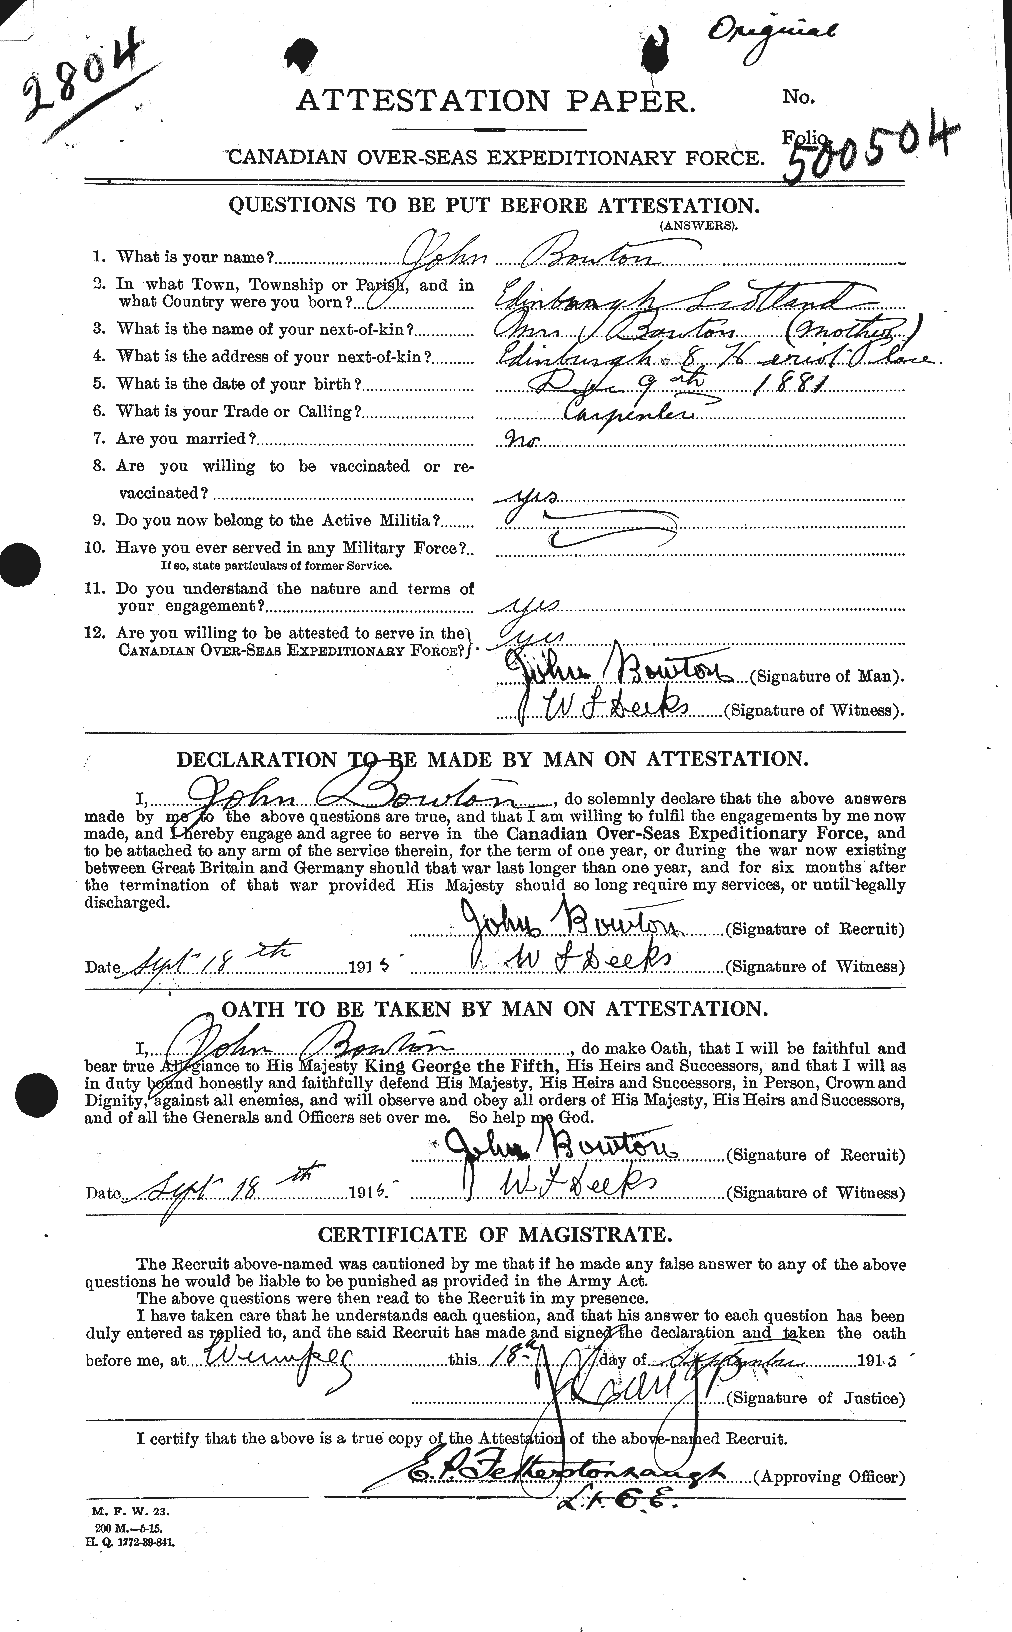 Personnel Records of the First World War - CEF 256293a